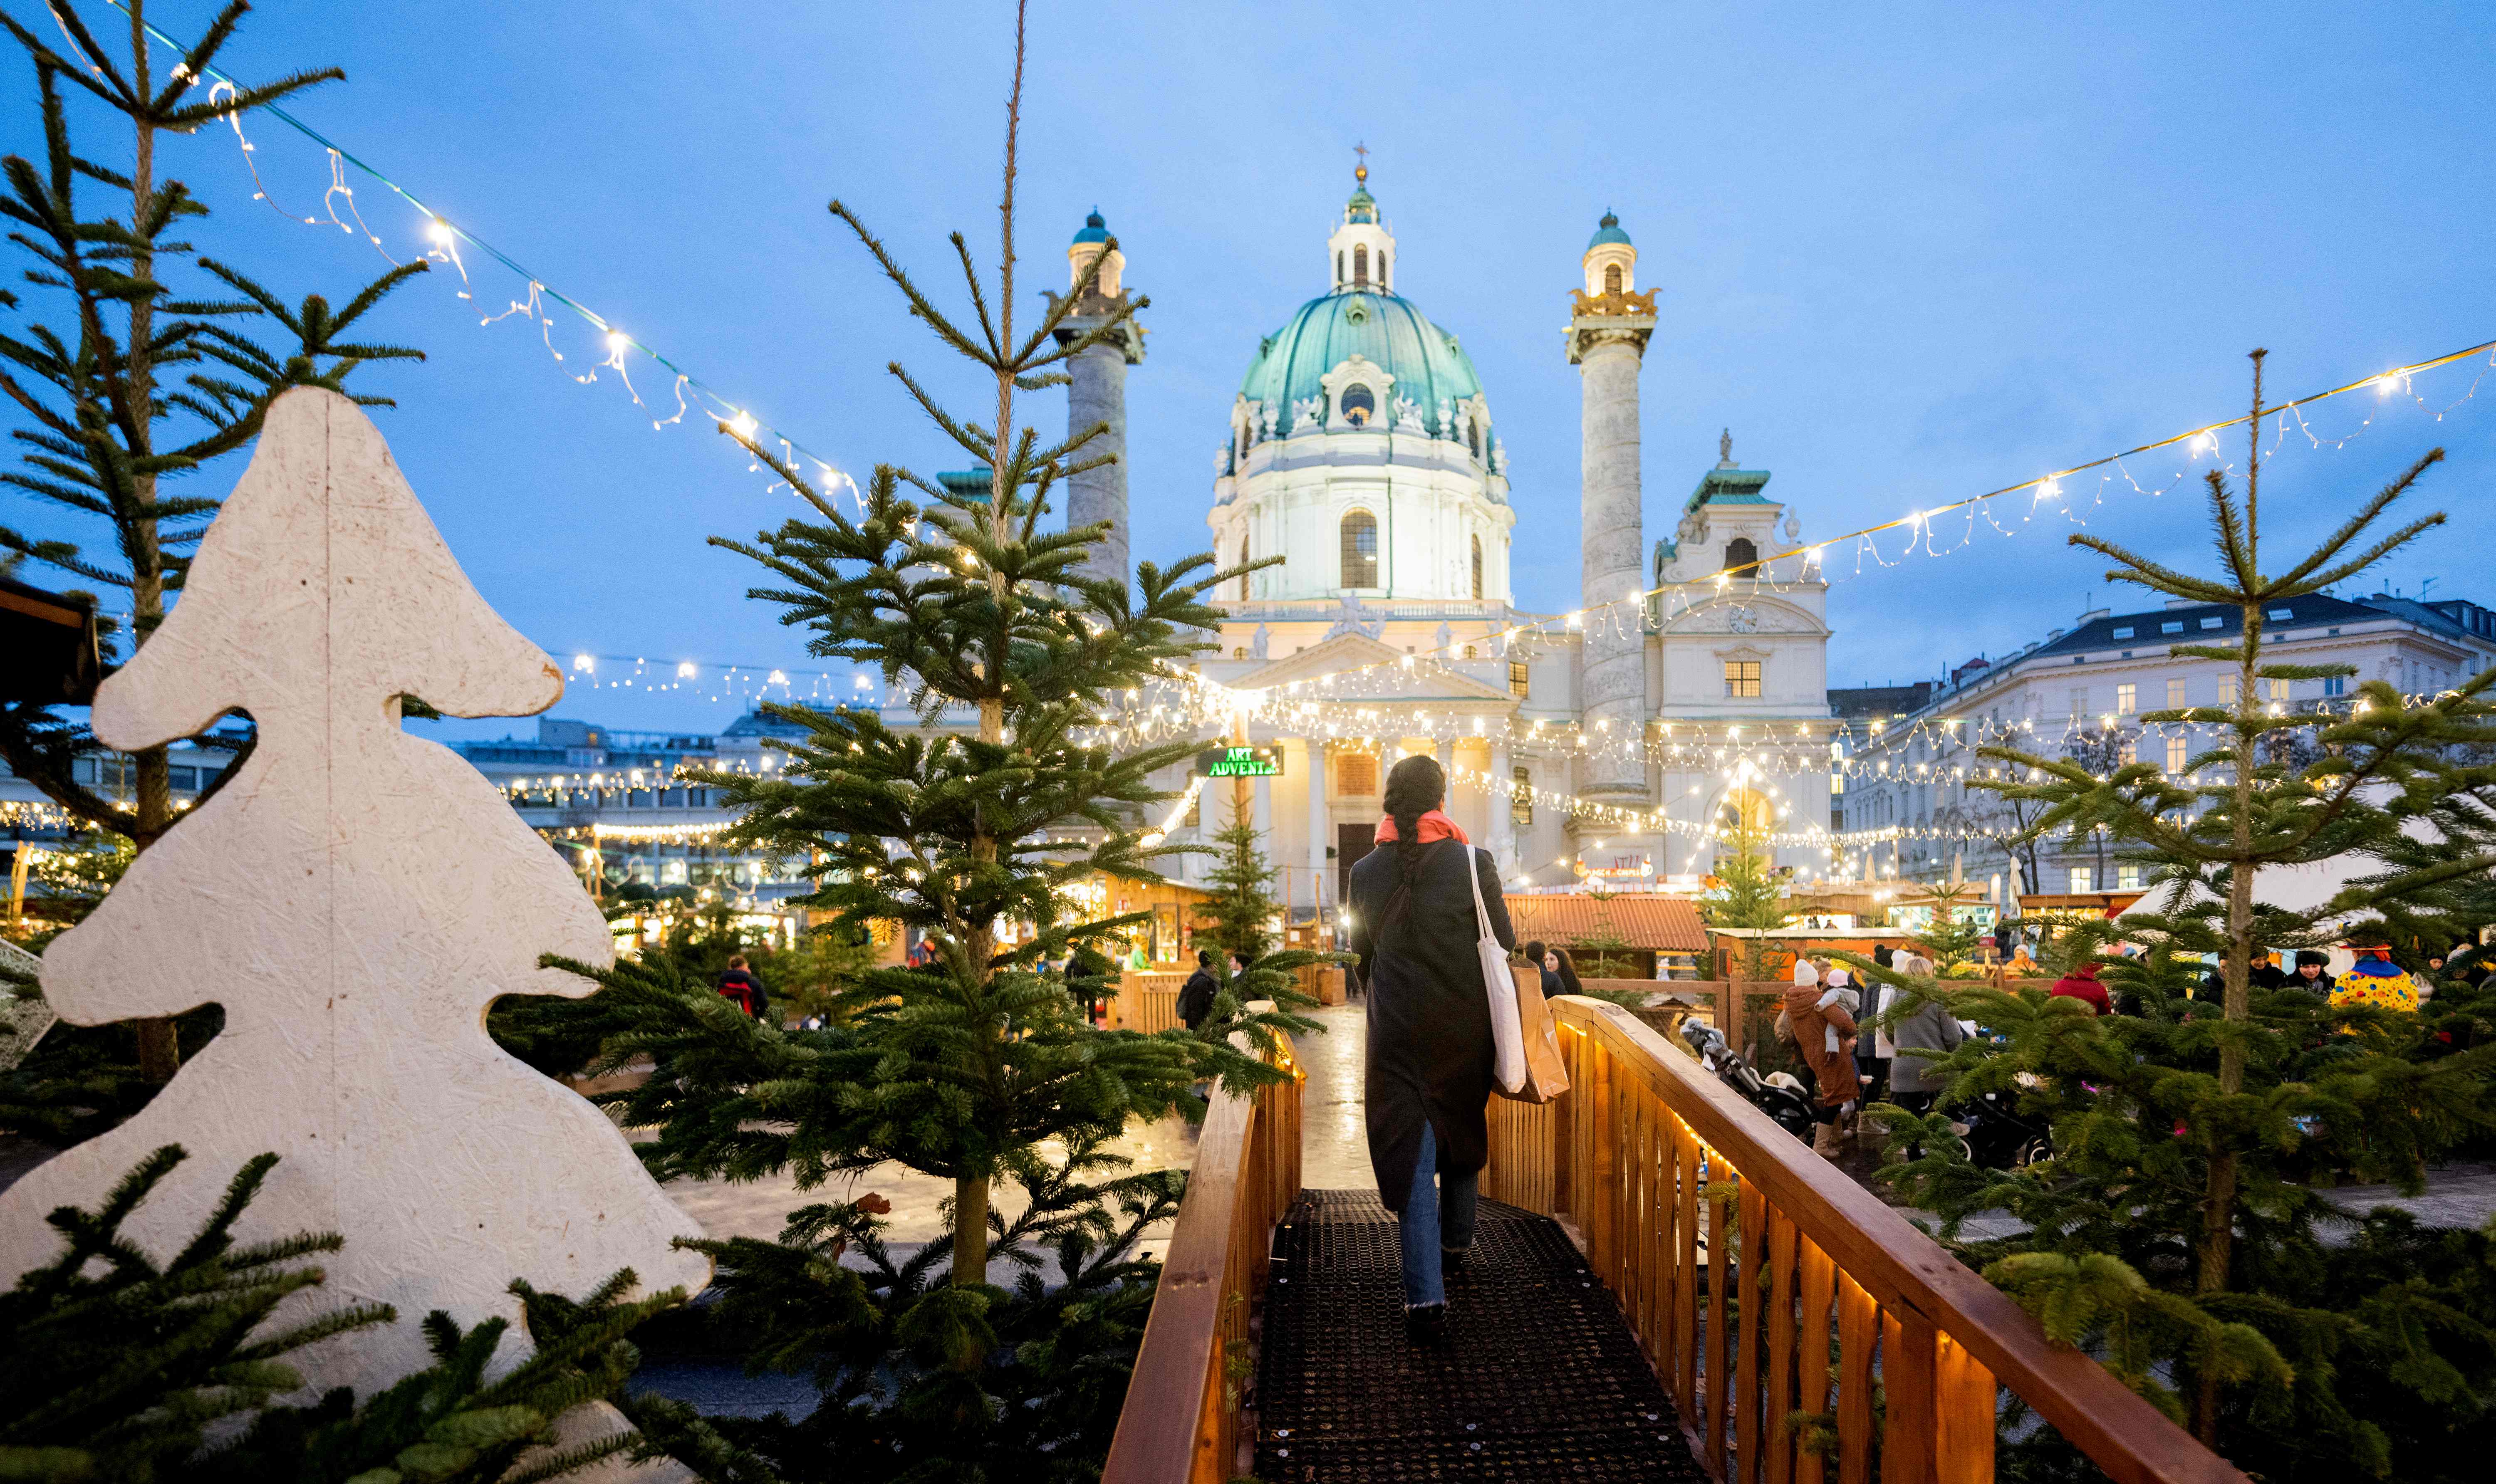 A visitor walks across the Christmas Market in Vienna, Austria, on 13 December 2021